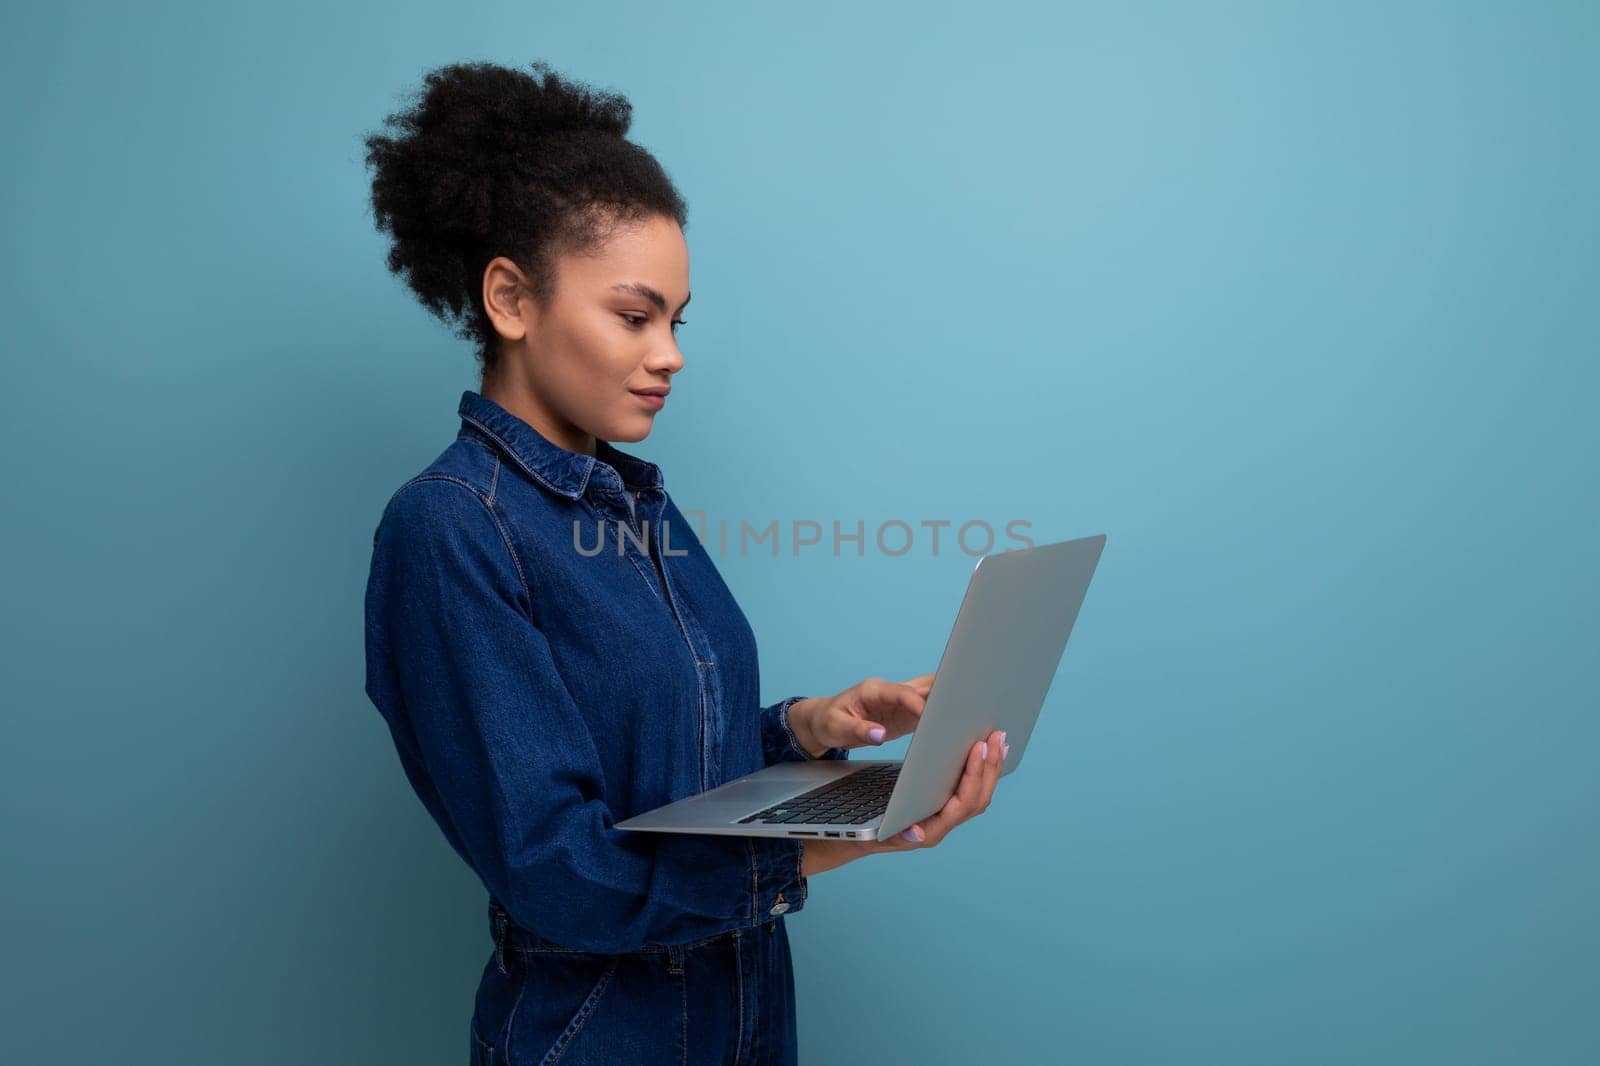 young successful woman with dark skin and black curly hair dressed in a blue denim suit works remotely using a laptop.